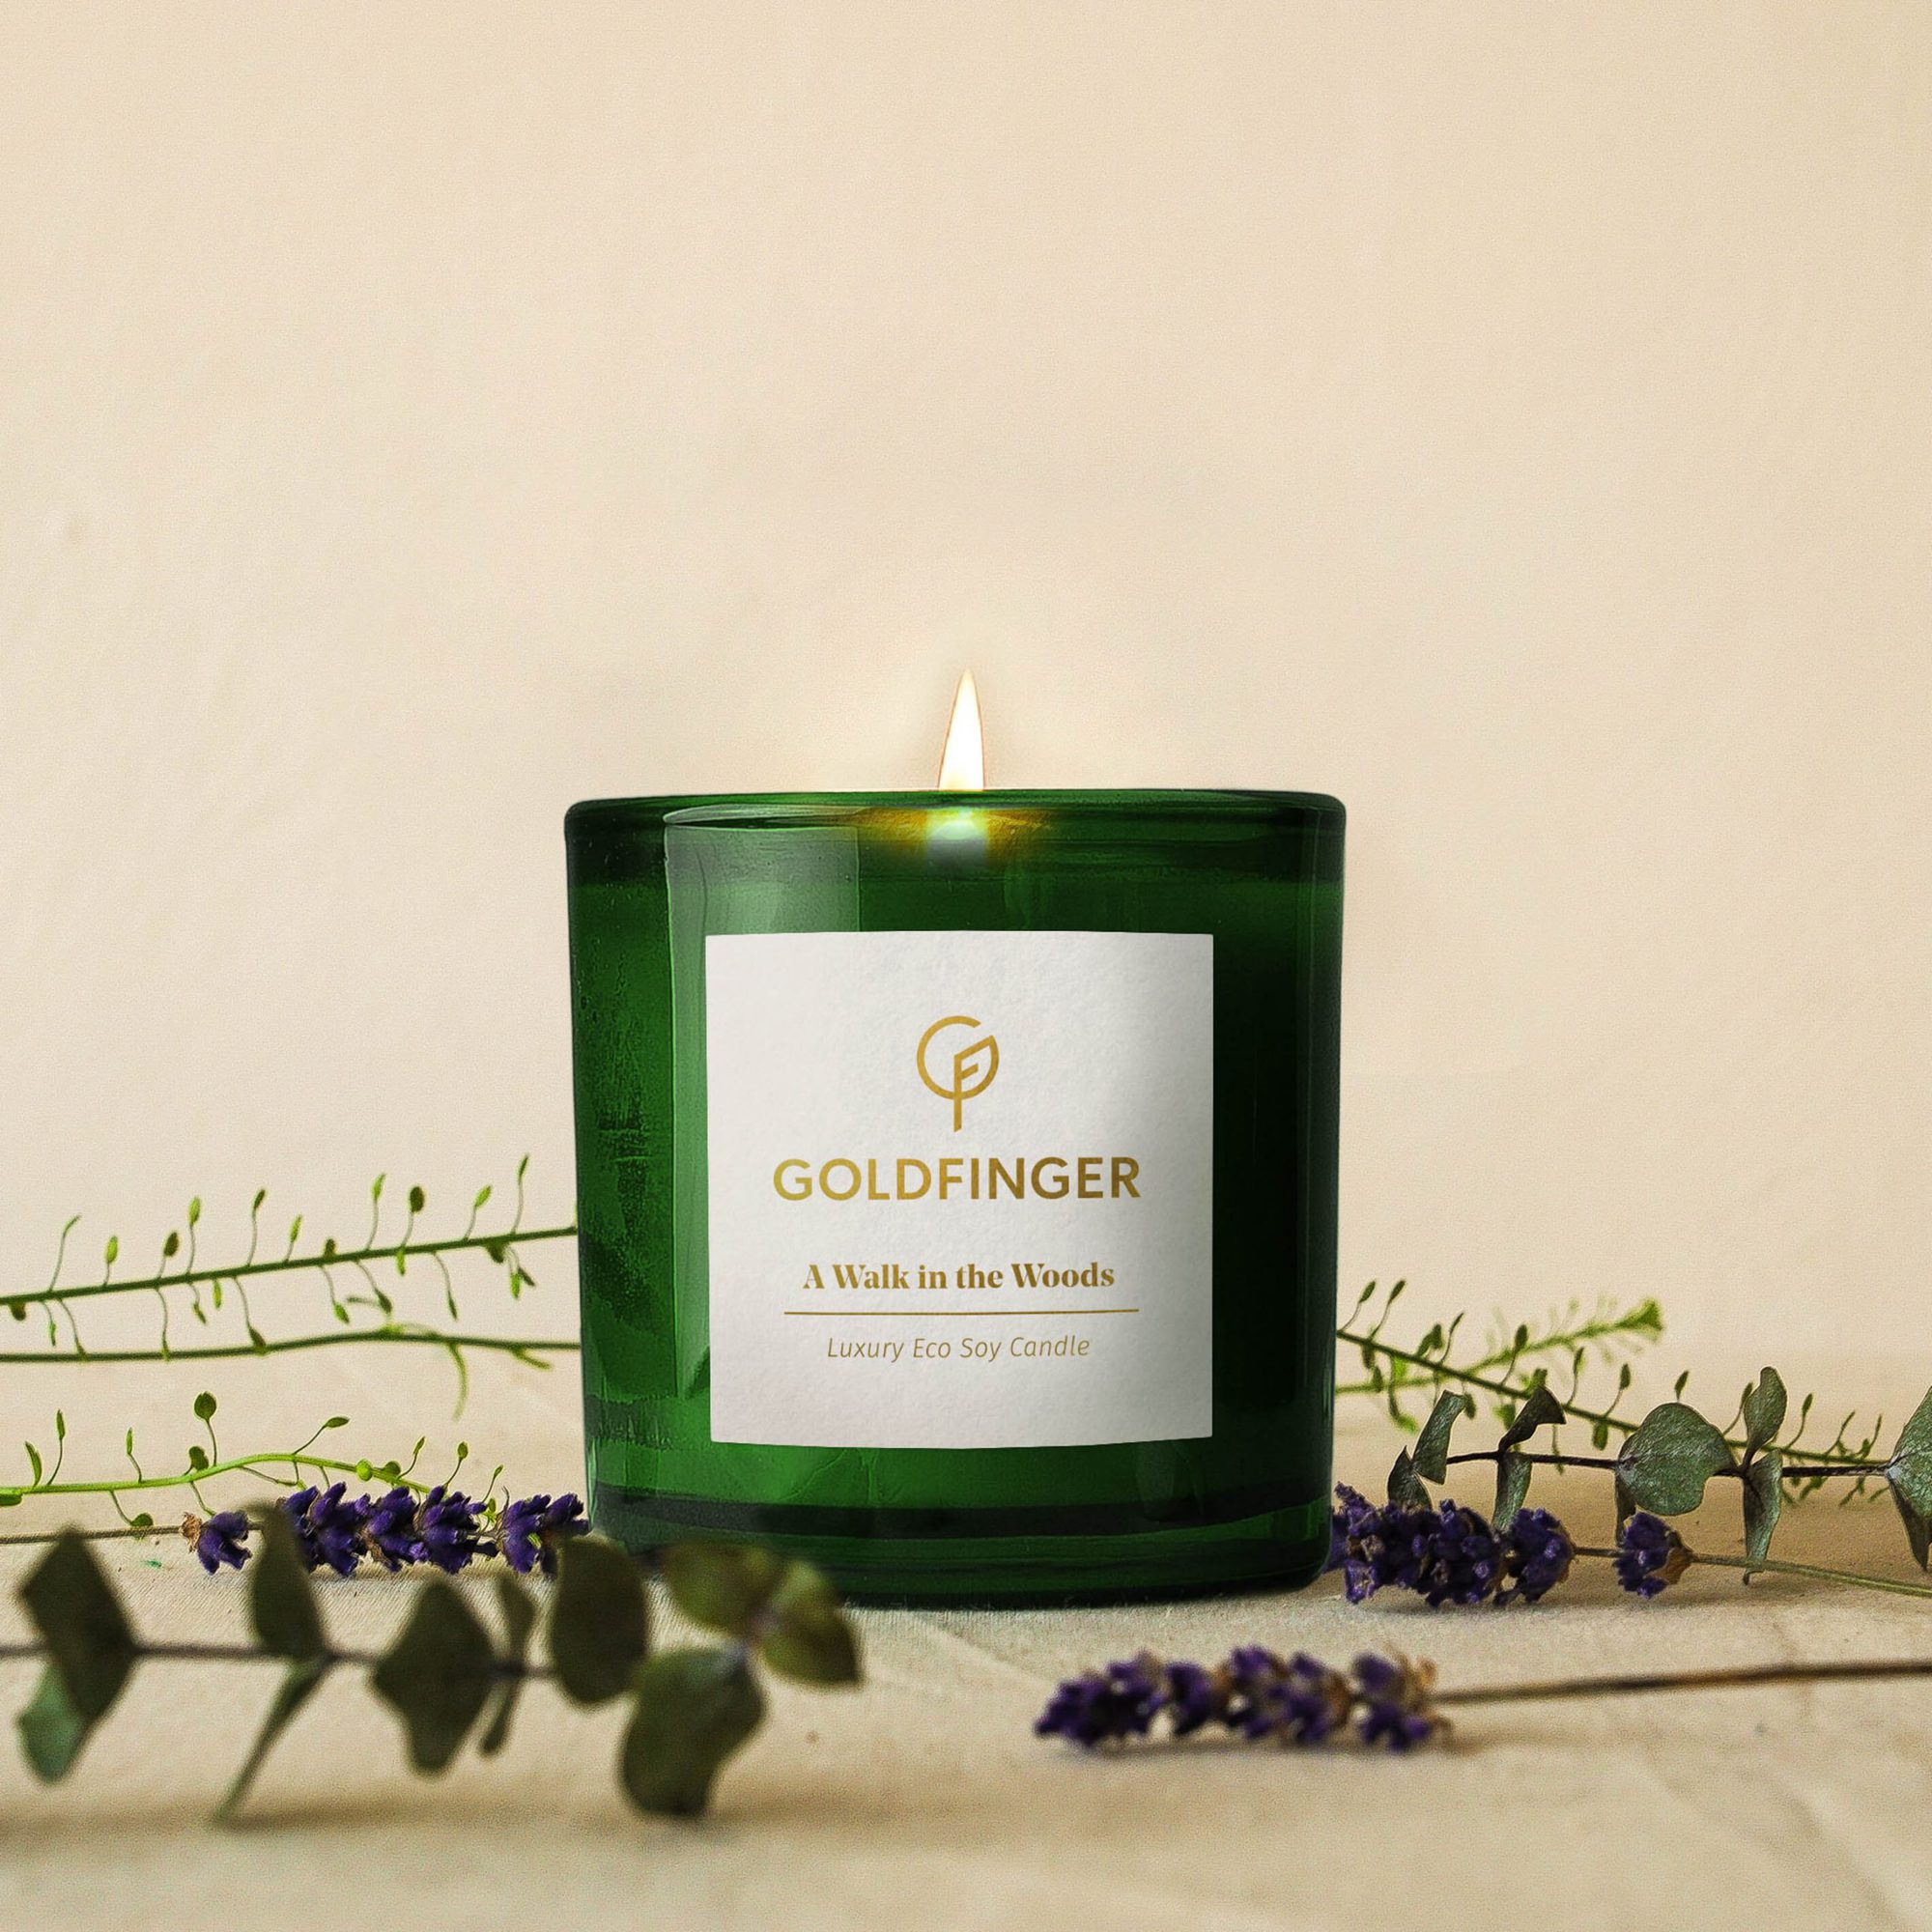 Luxury Eco-Soy Candles – The Complete Set